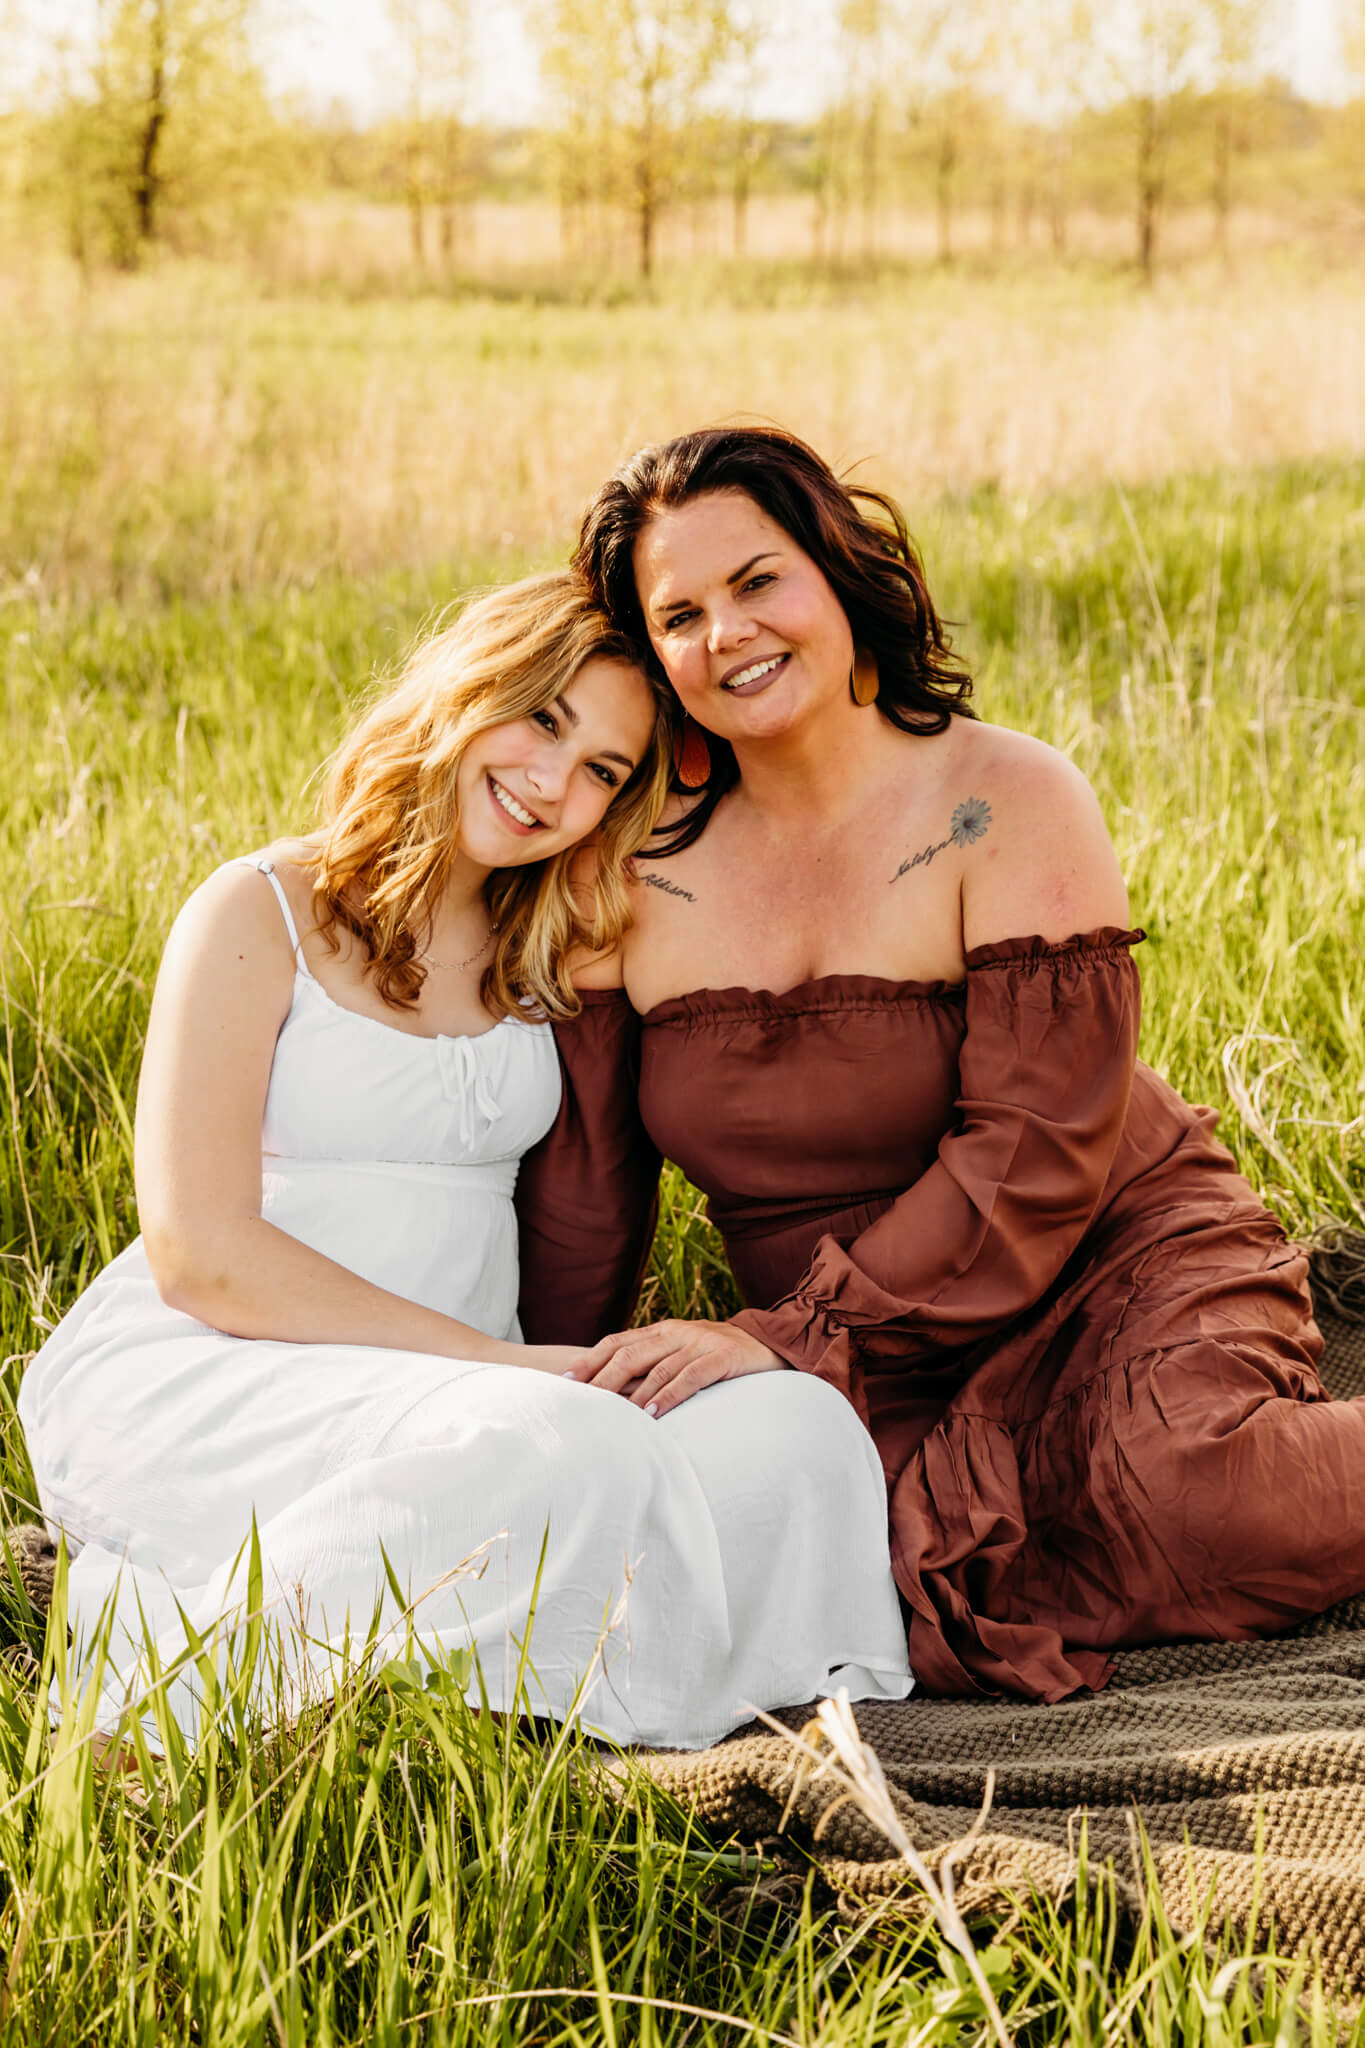 teen daughter resting her head on her moms shoulder as they sit in a grassy field